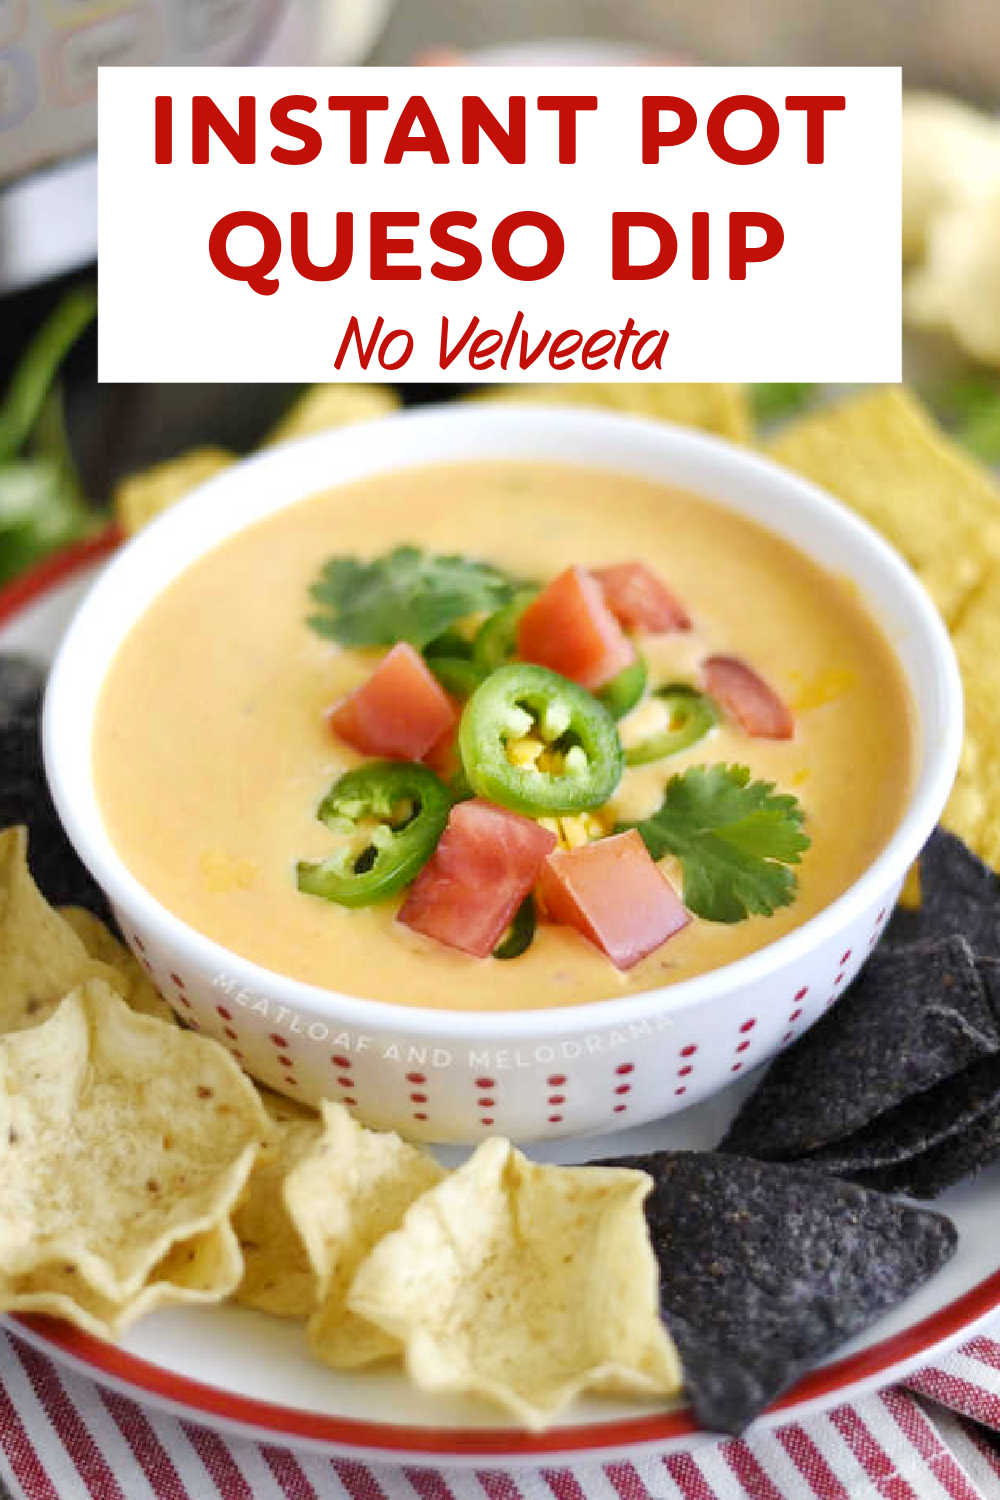 Easy Instant Pot Queso Dip made with cream cheese shredded cheddar cheese and Monterey Jack -- no Velveeta -- is a delicious hot cheese dip perfect for game day and parties. This easy recipe is Keto friendly, too! via @meamel